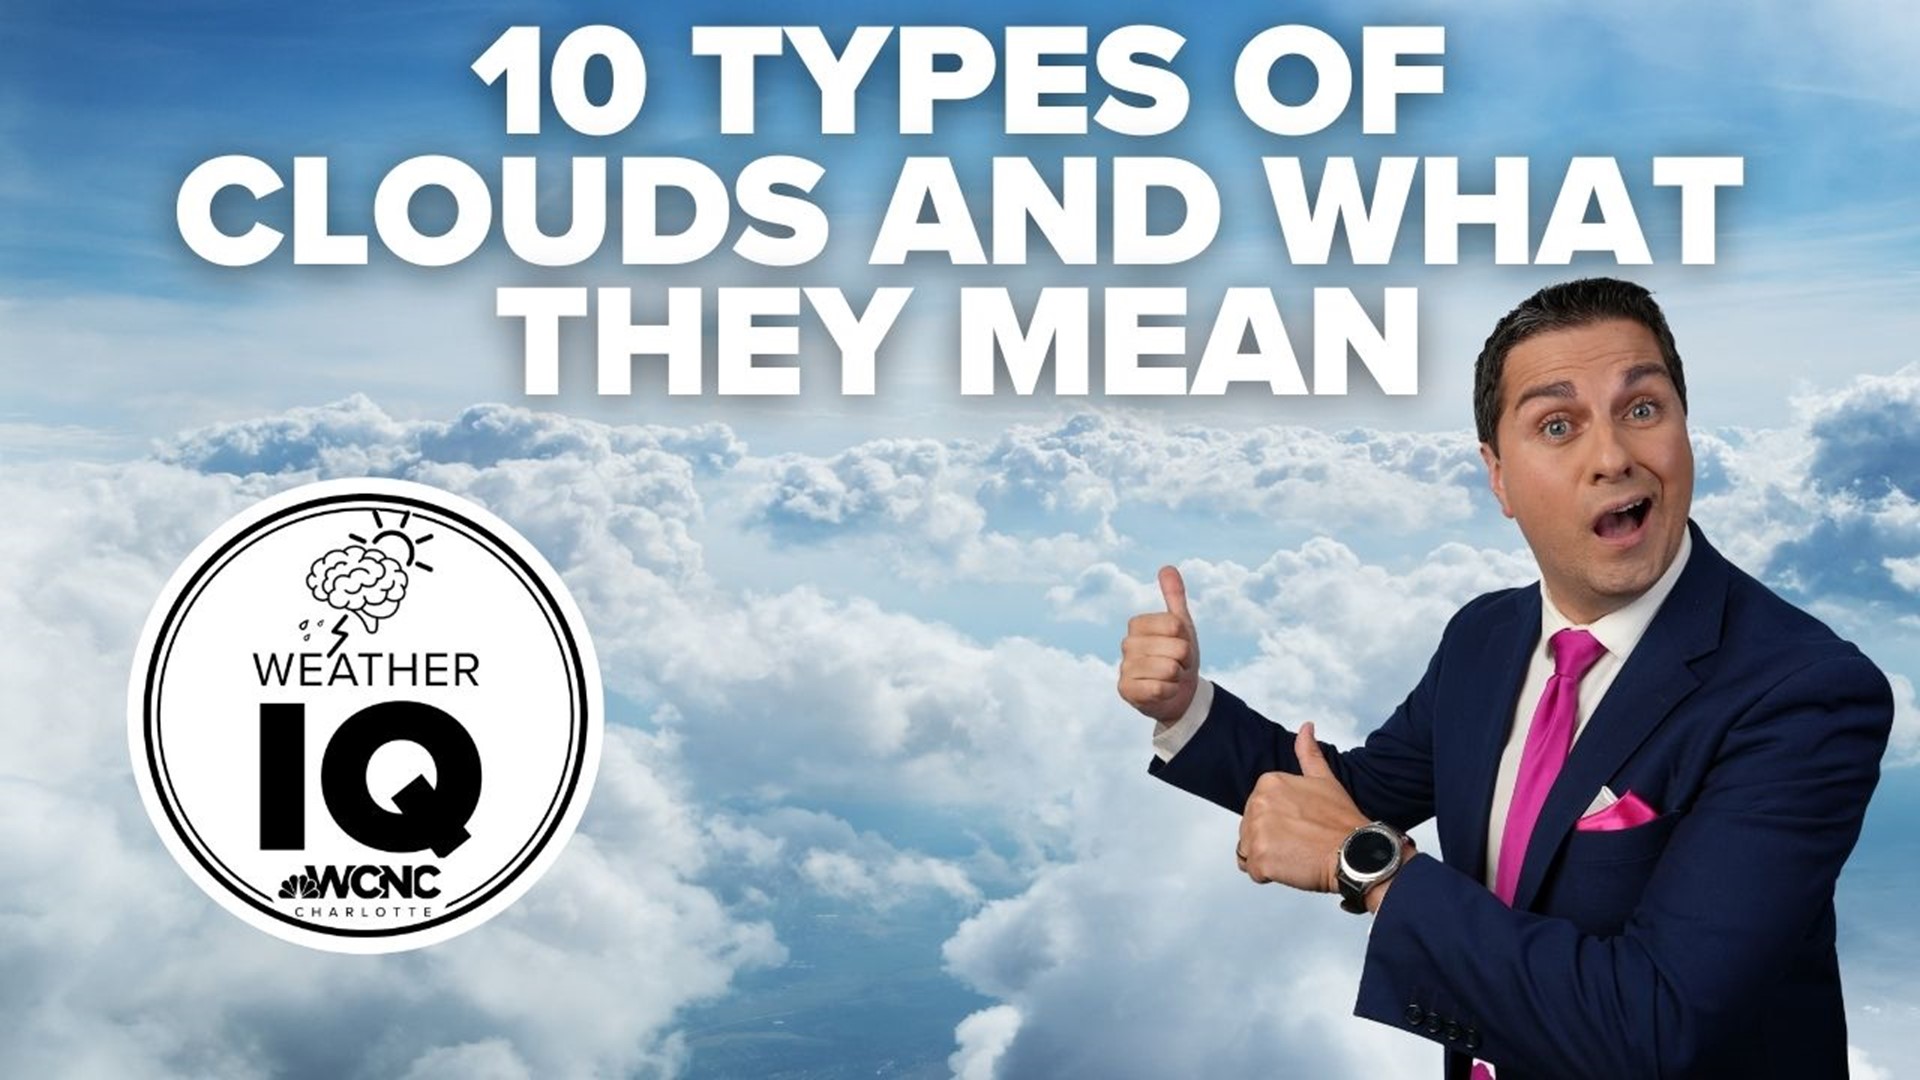 Clouds are everywhere! From white, puffy clouds on a sunny day to dark storm clouds that bring severe weather, here's what you need to know about 10 types of clouds.